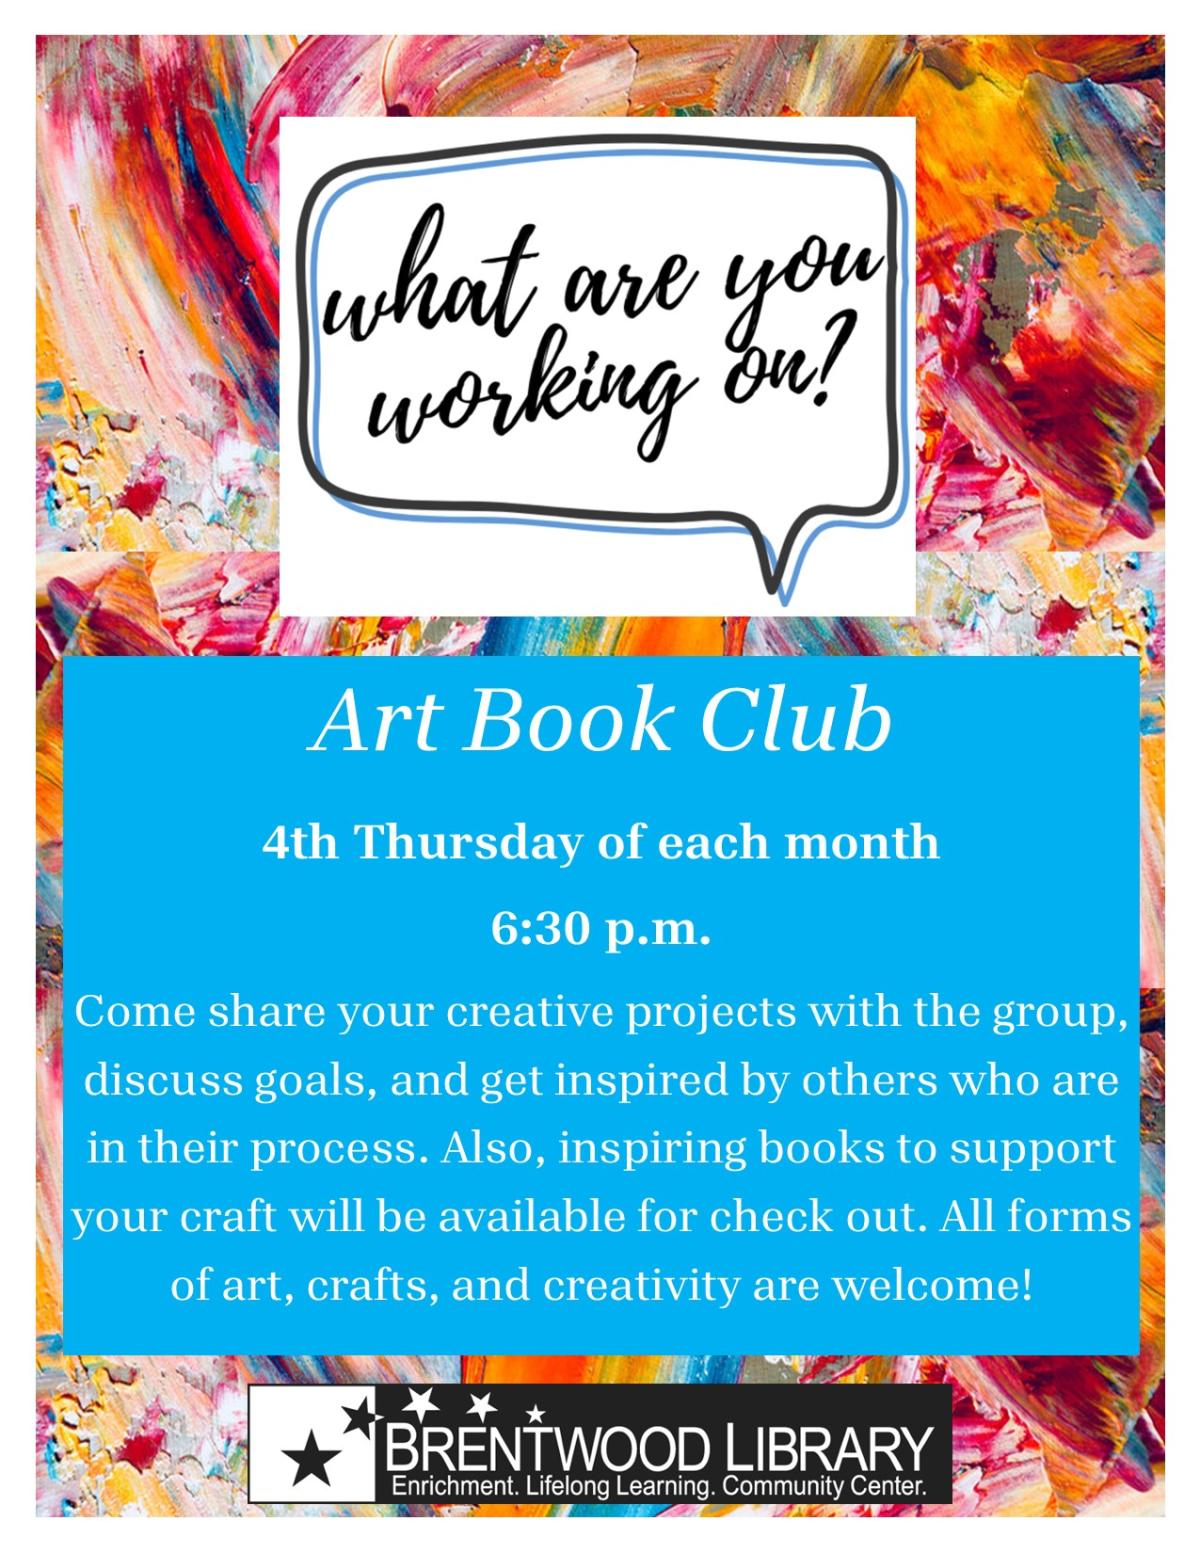 Art Book Club Flyer - "What are you working on?"